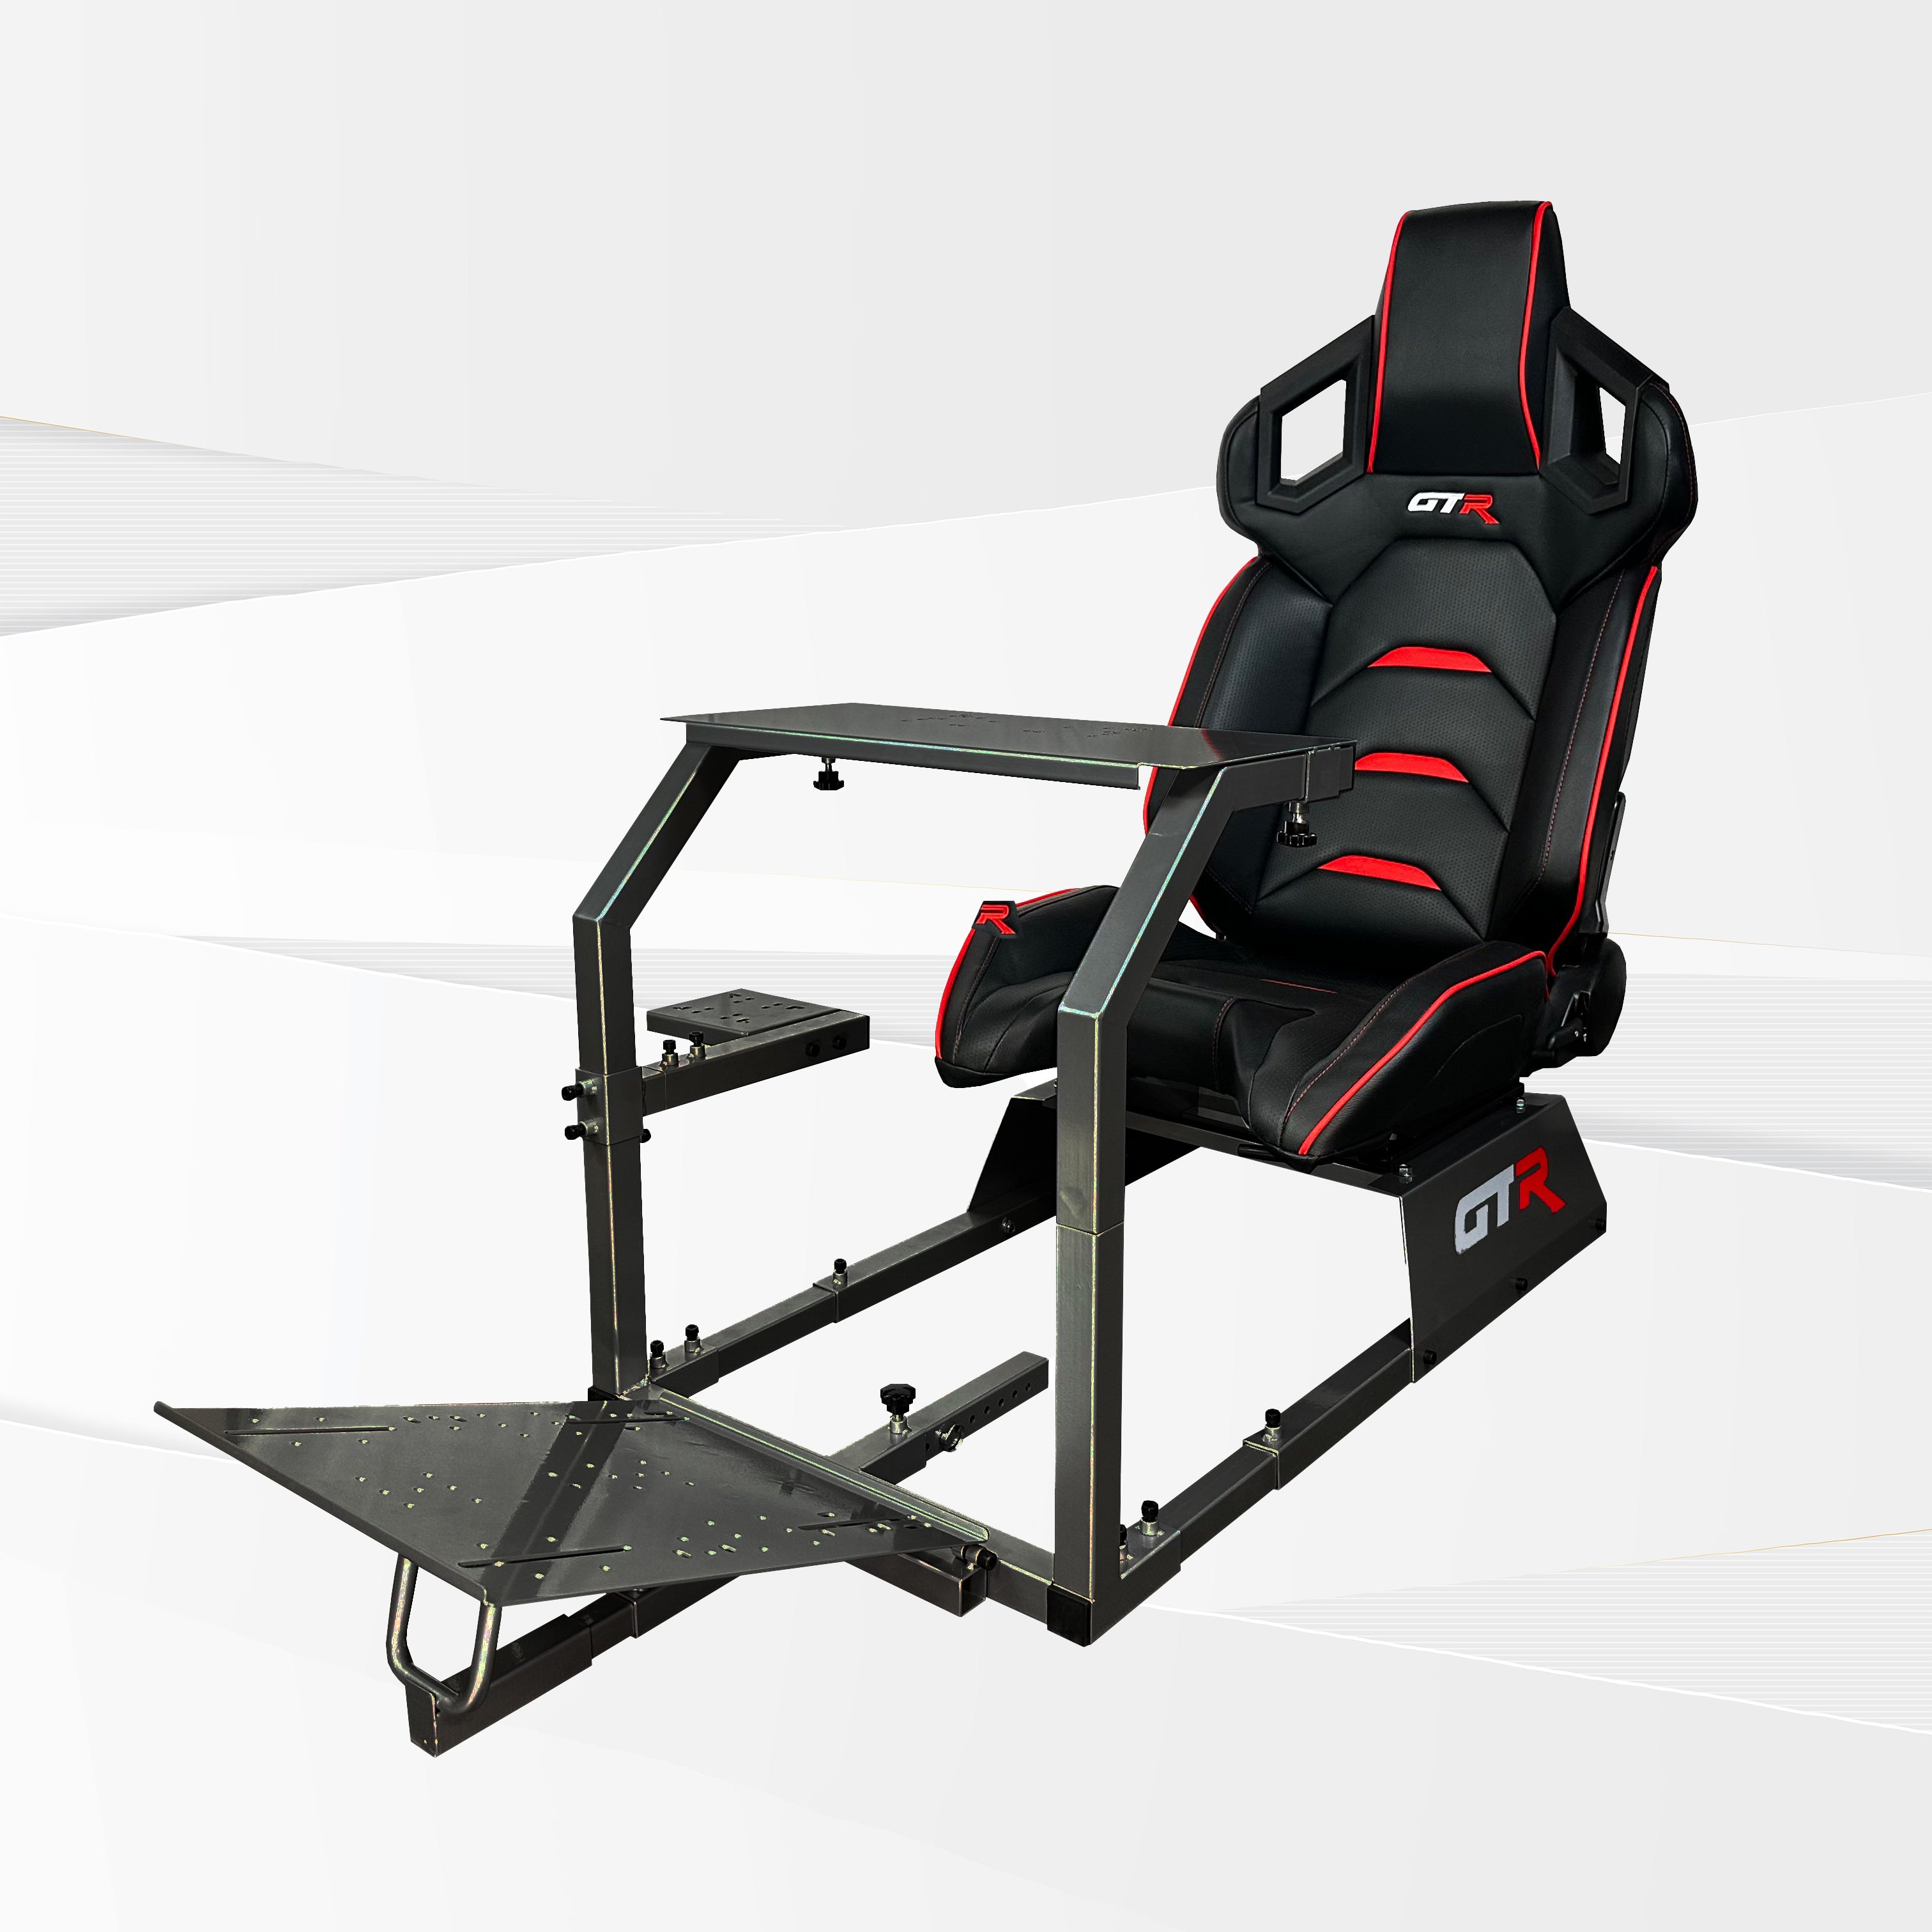 GTR Simulator - Design, Tested, and Used by Professional Racer